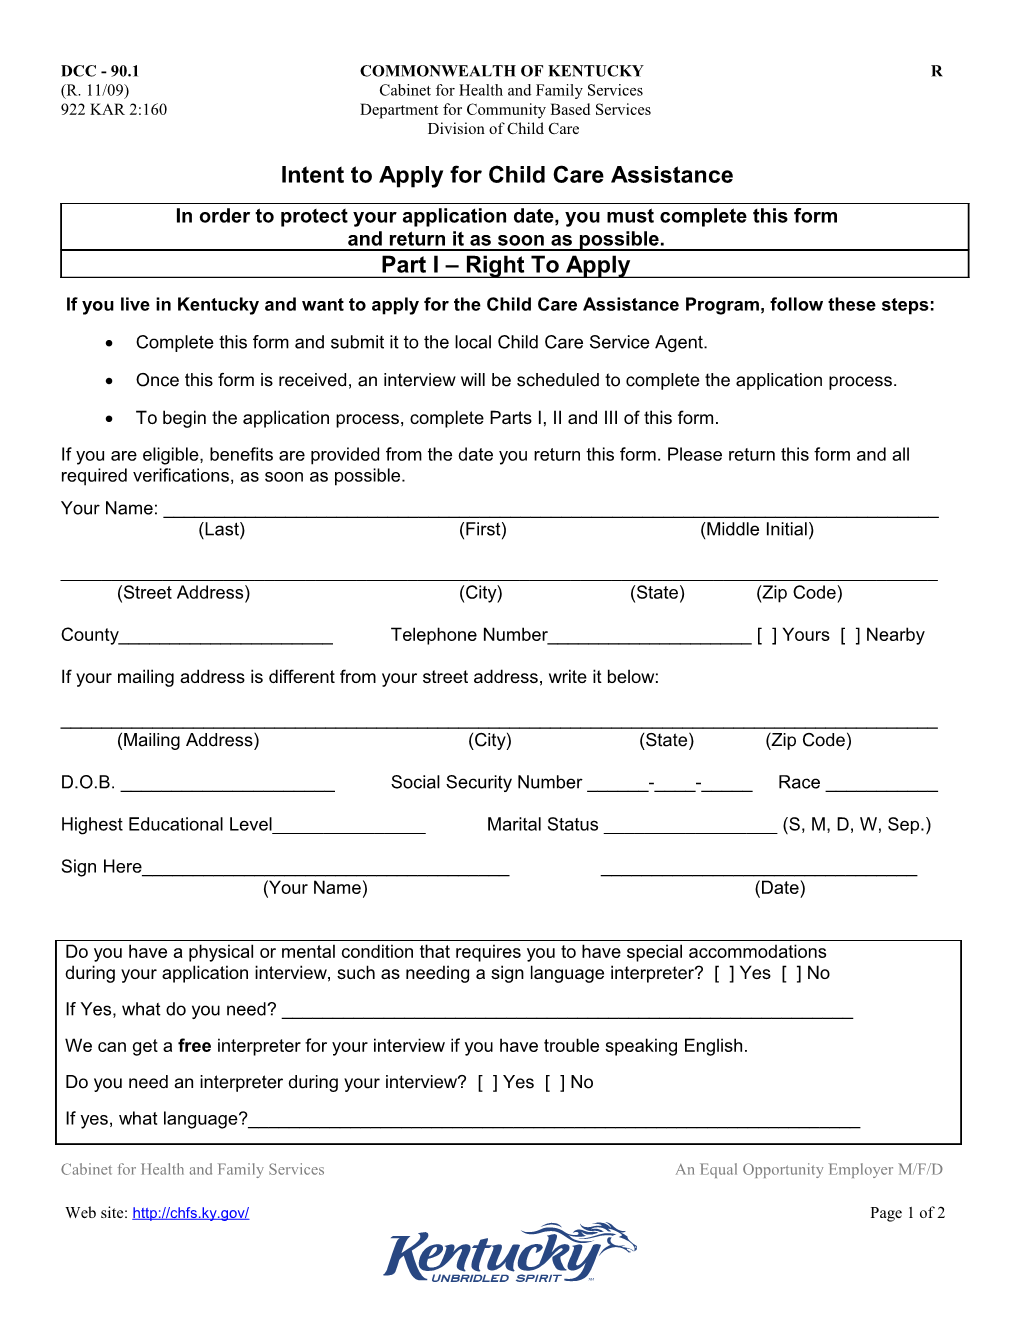 Intent to Apply for Child Care Assistance